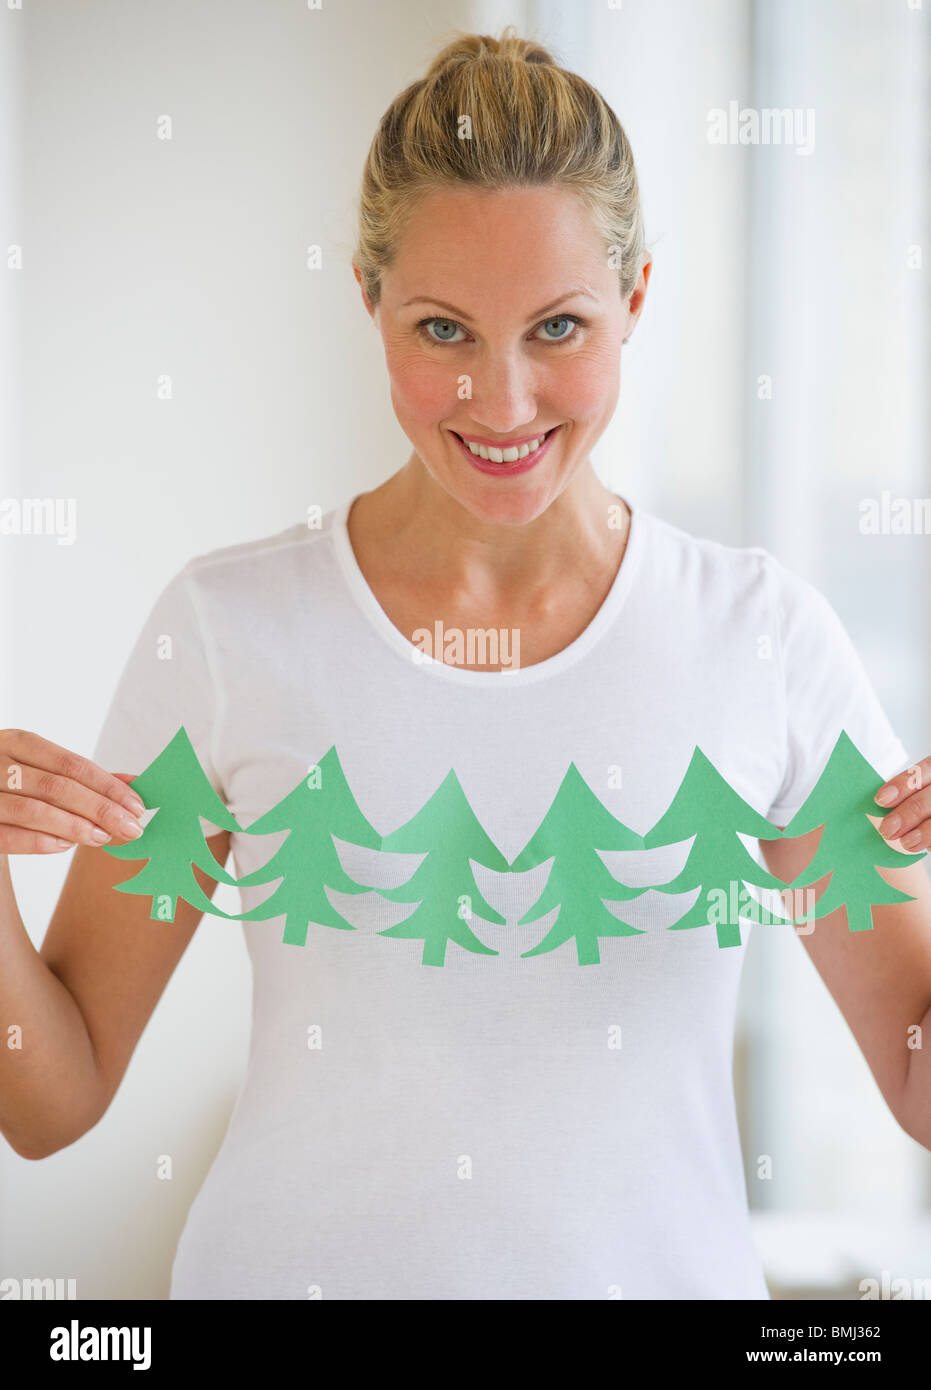 Woman holding cut out of trees Stock Photo